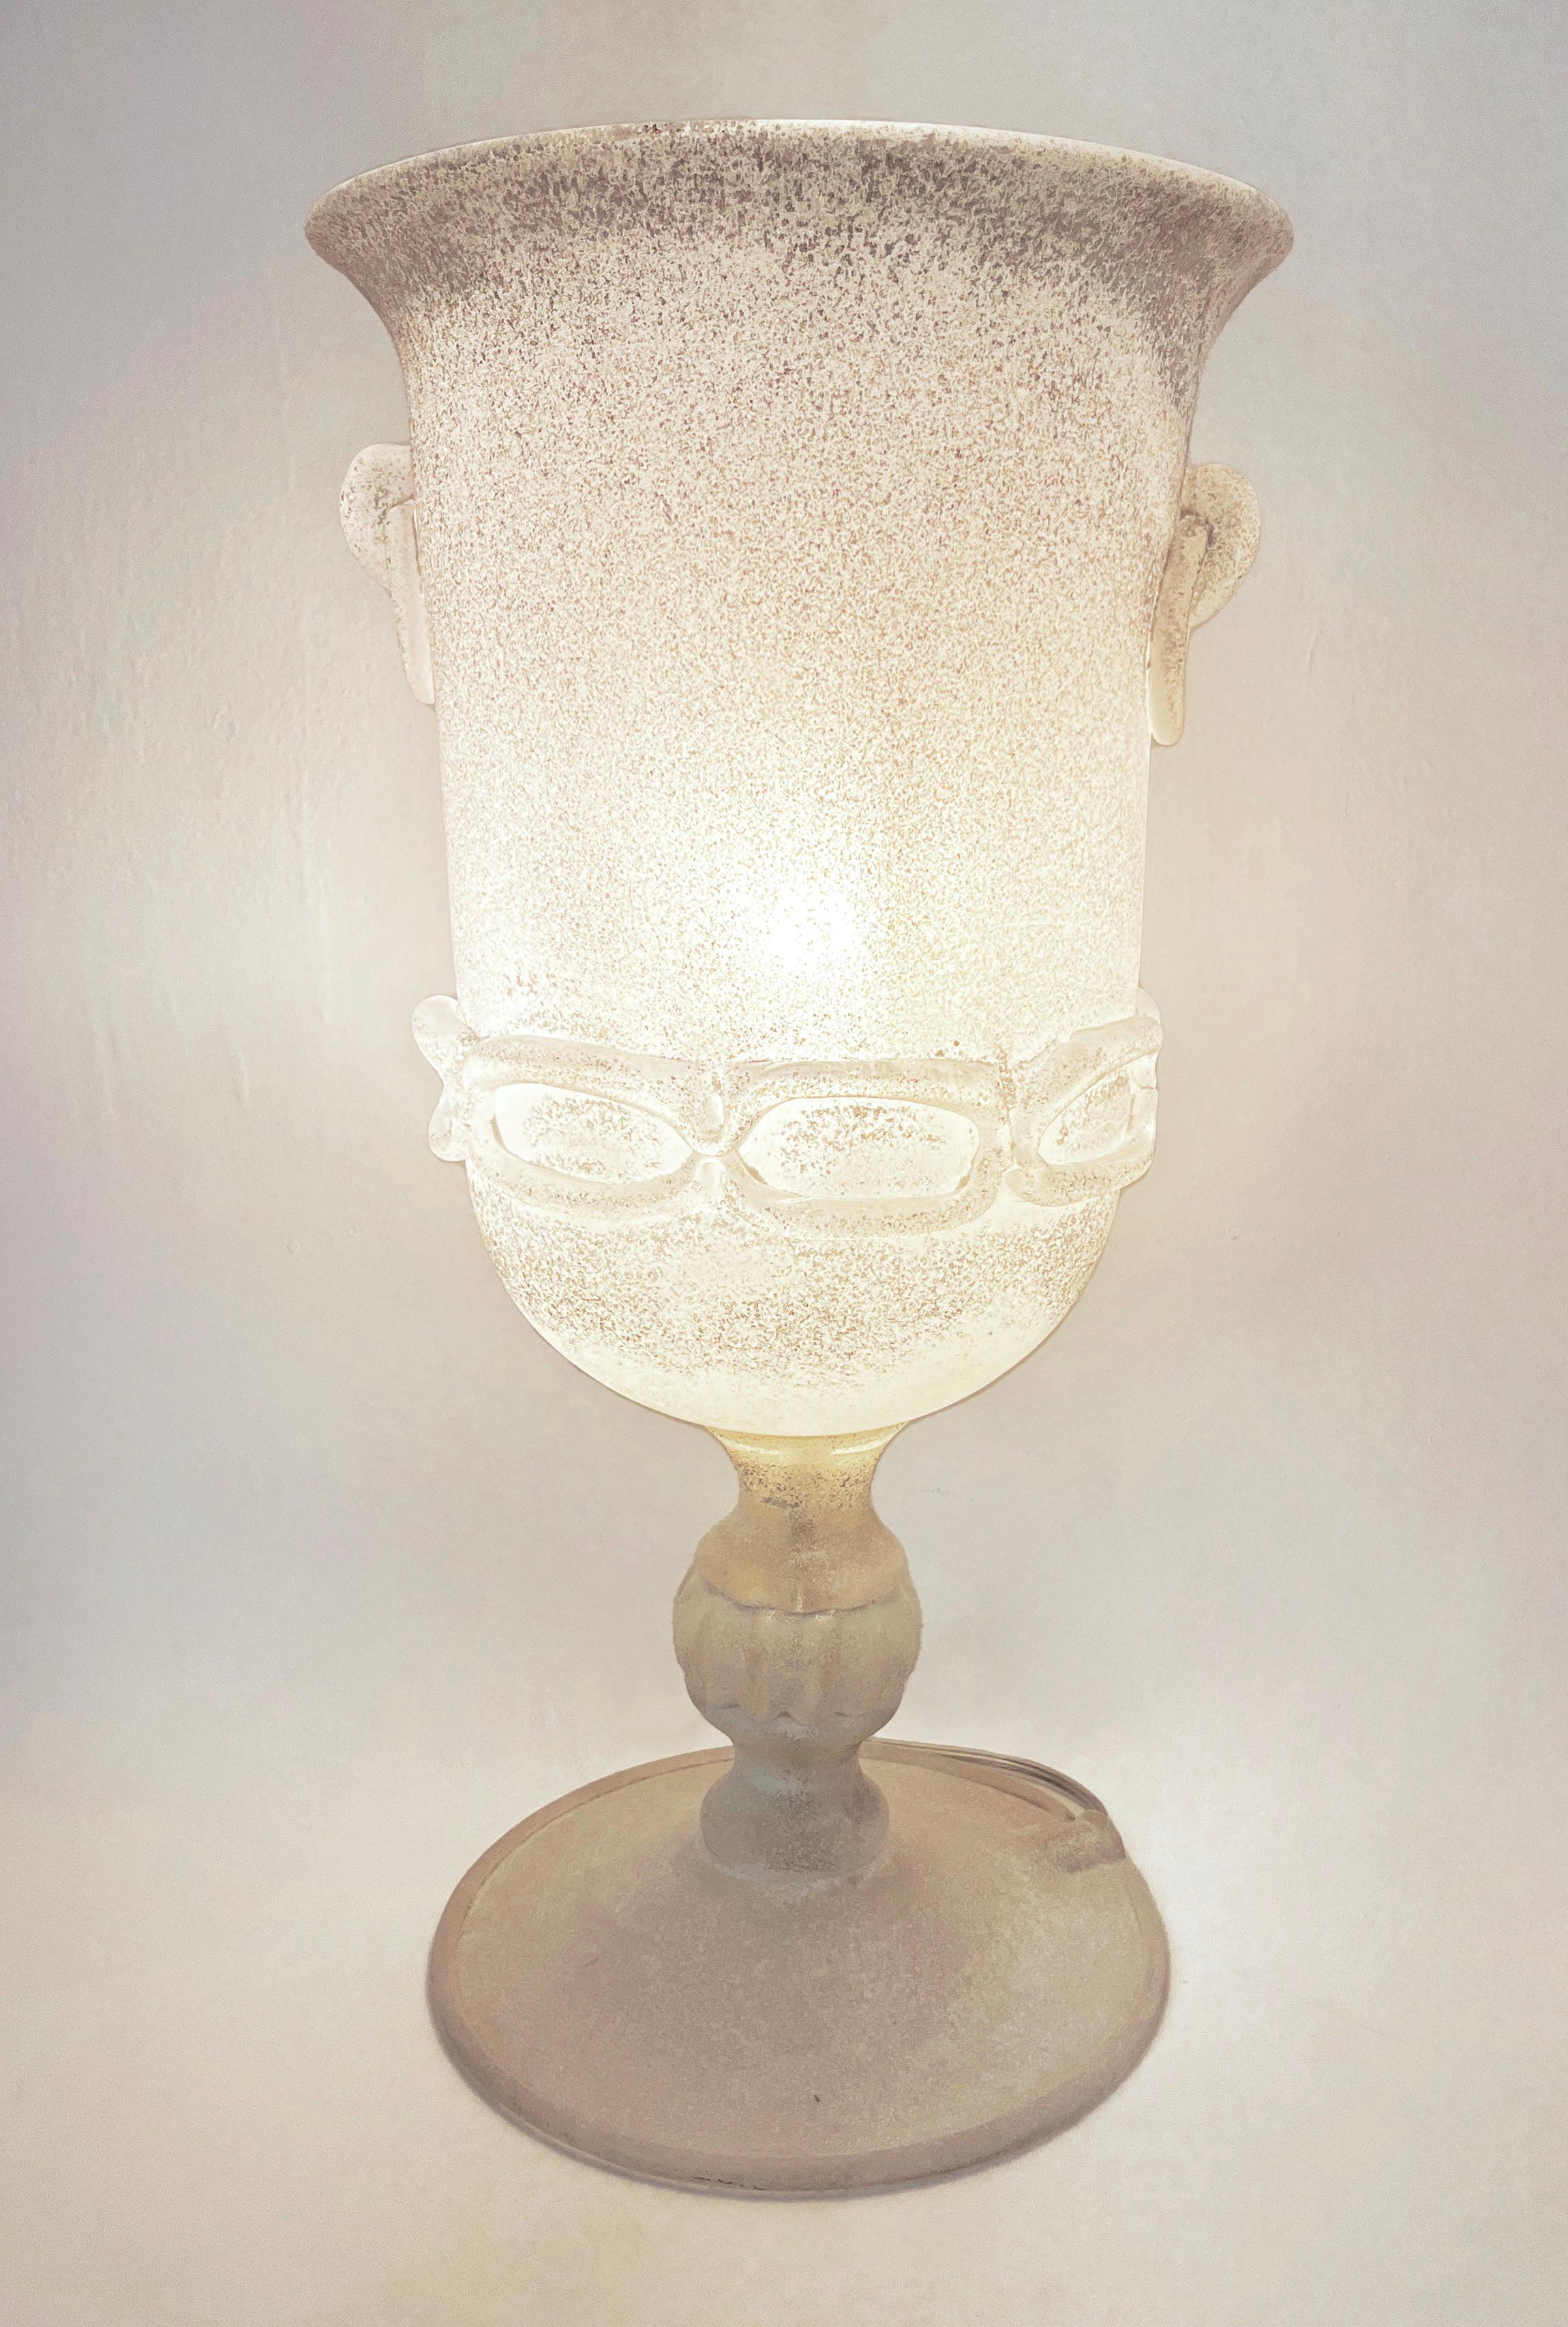 A rare Italian mid-century modern organic Murano glass lamp, with Florentine neoclassical urn shape, by Seguso, precious because worked with an exceptional Scavo technique that gives an unusual stone antique look as if the piece had been excavated.